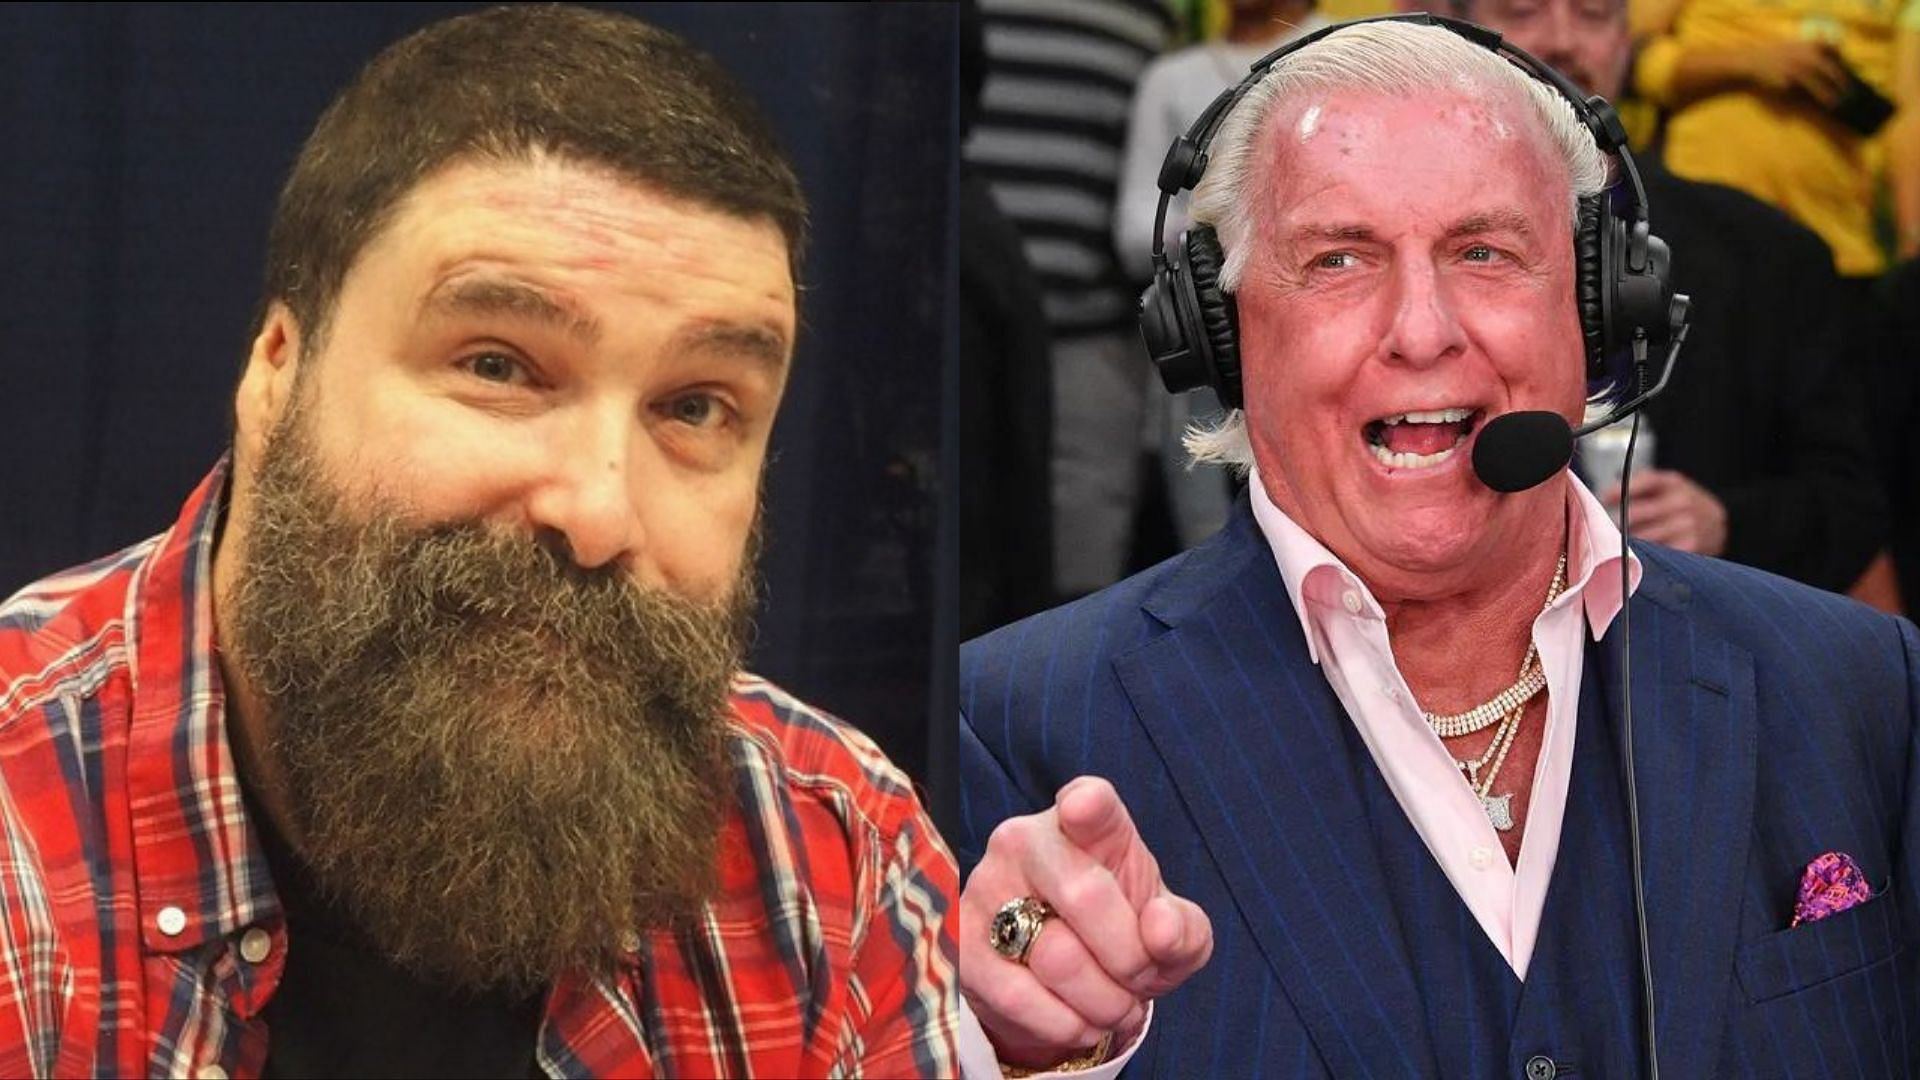 Mick Foley and Ric Flair are WWE Hall of Famers